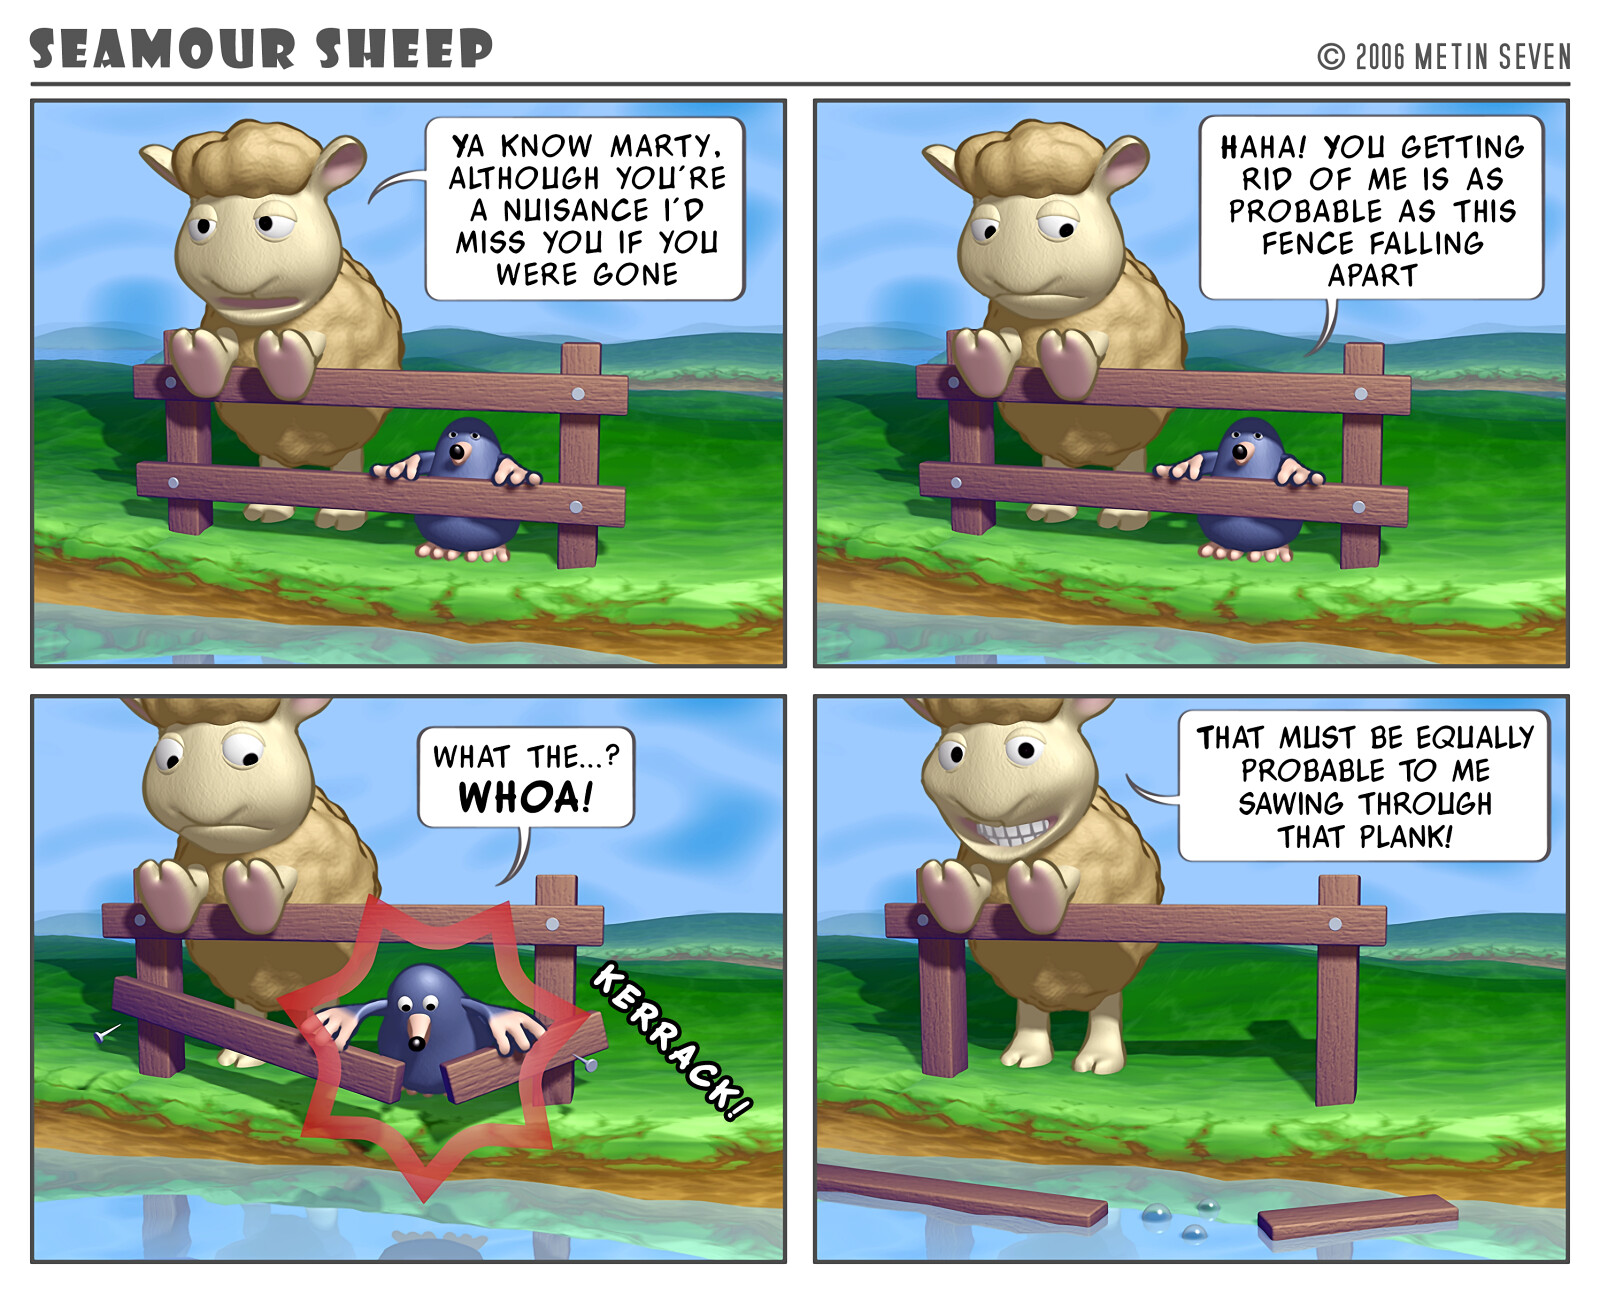 Seamour Sheep and Marty Mole comic strip episode: Probability